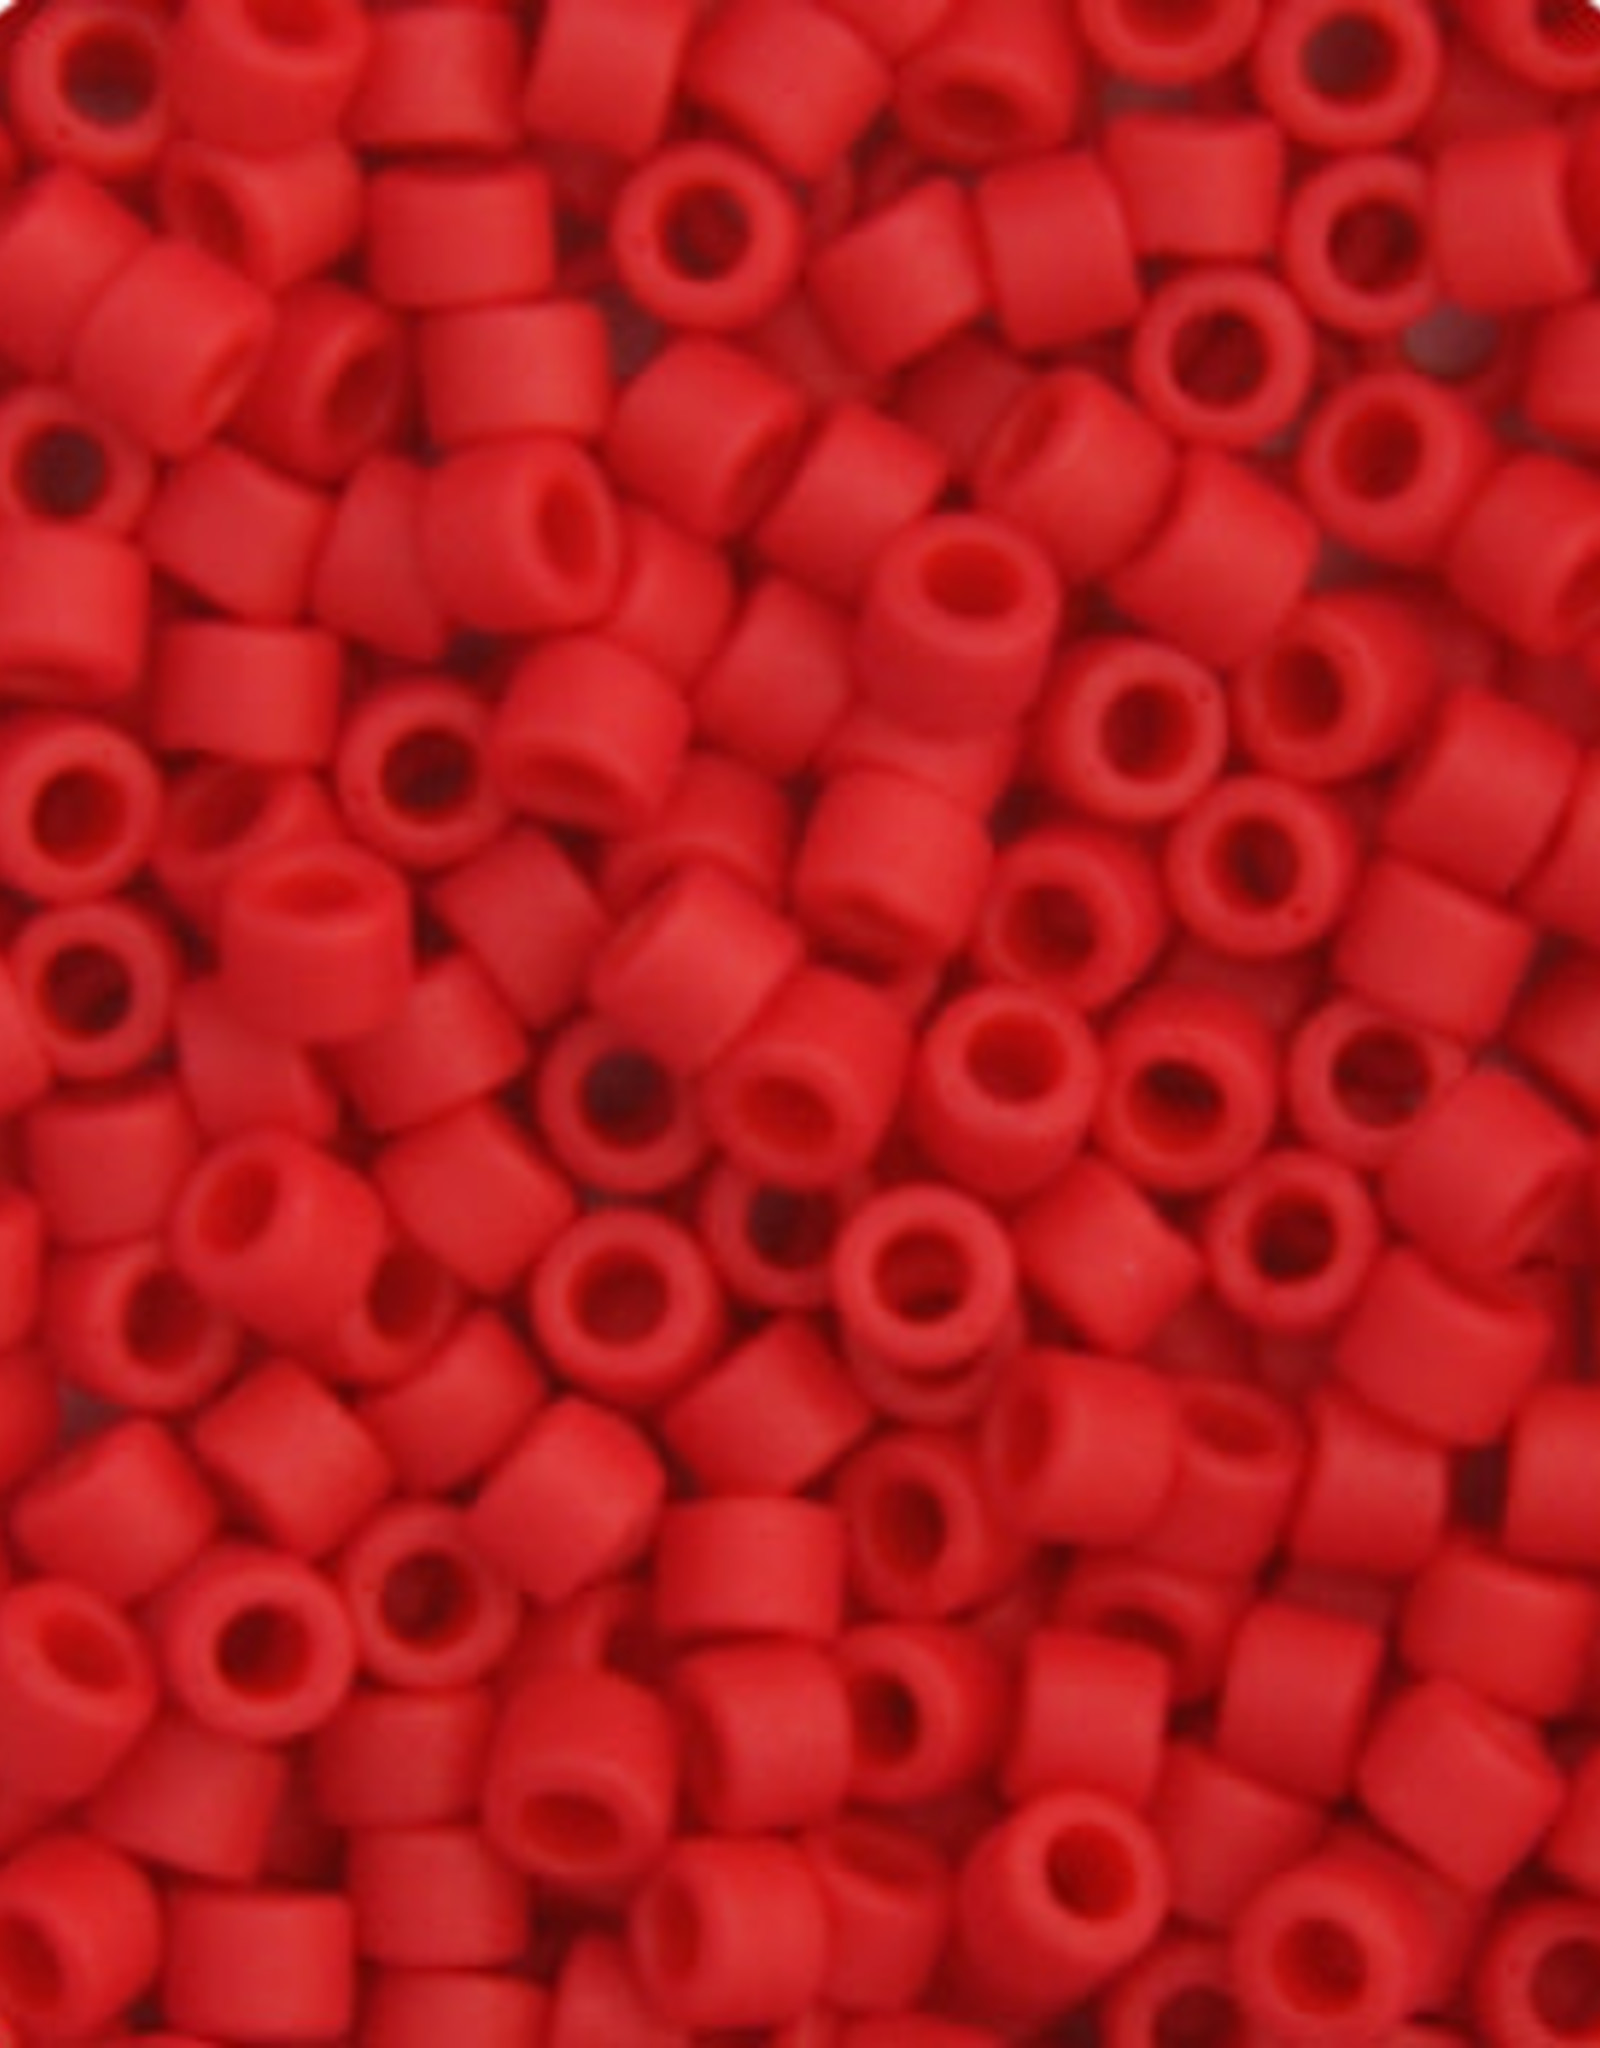 Miyuki Delica Seed Beads Delica  11/0 Rd Red Matte-Dyed 0796B 50G